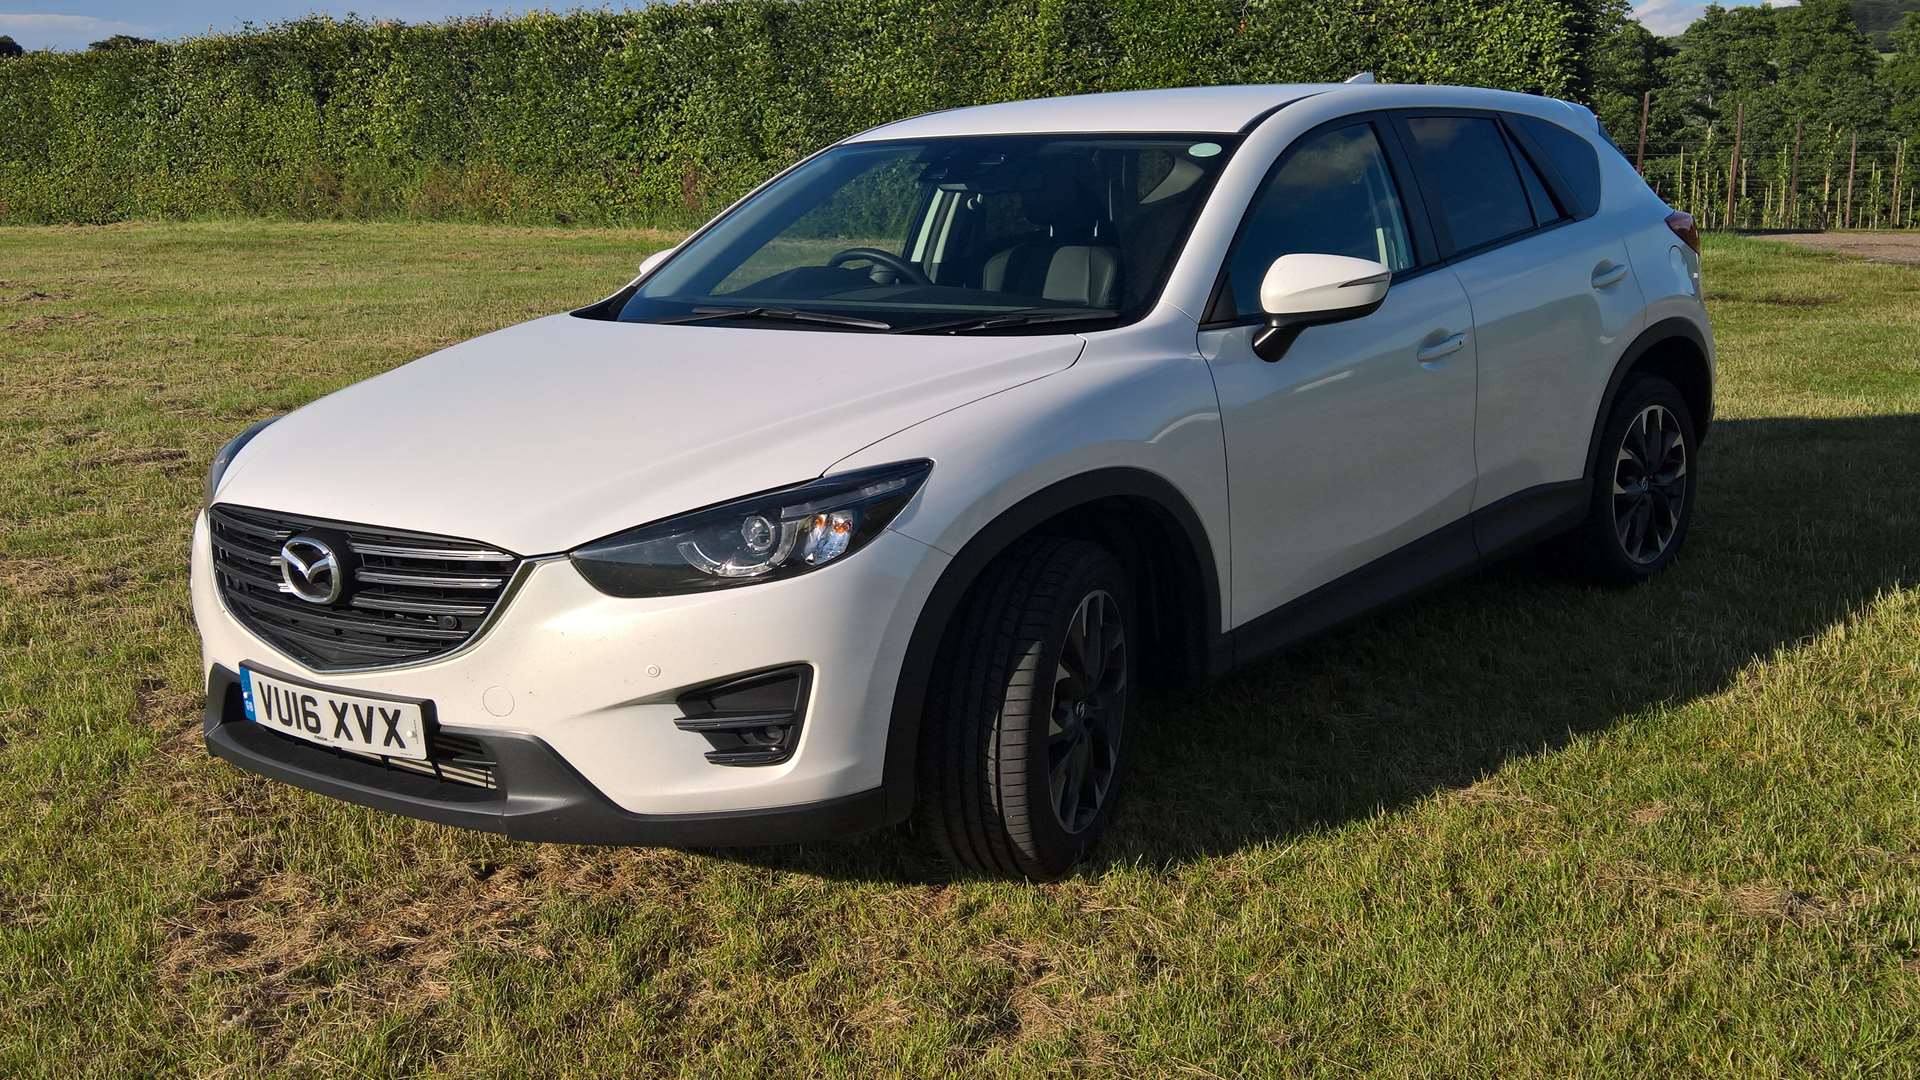 The CX-5 is one of the better-looking crossovers